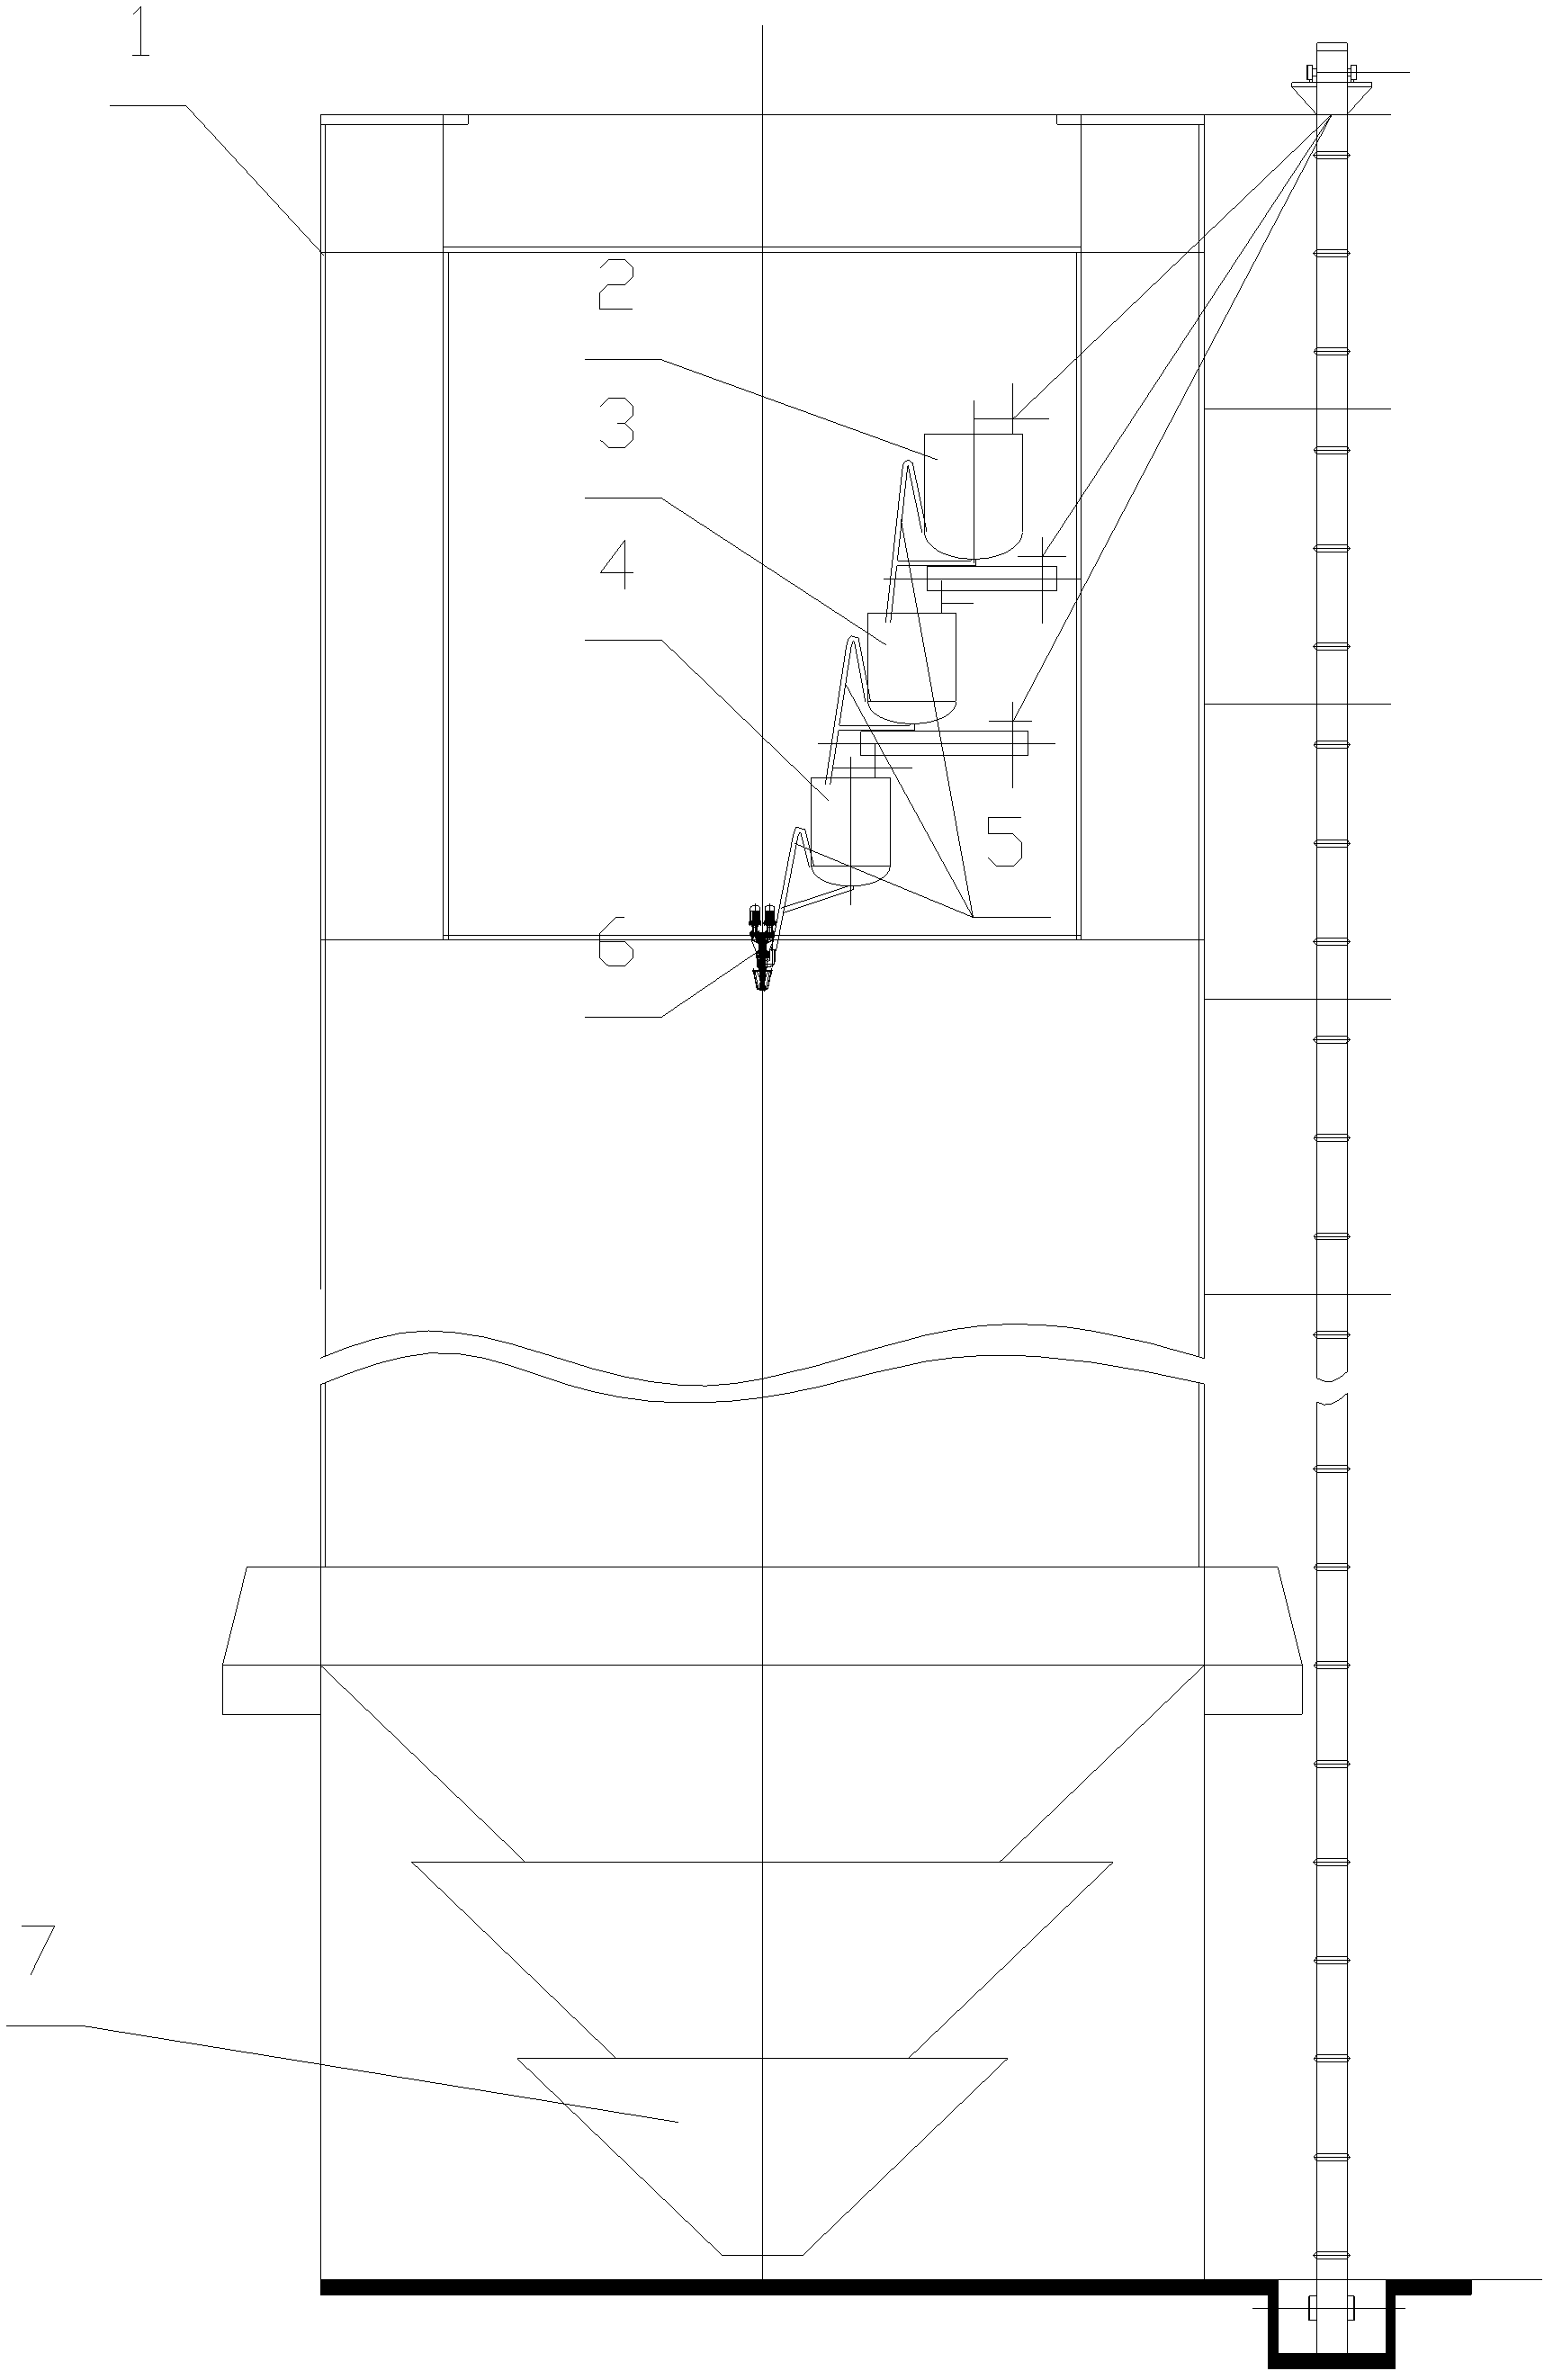 Full water-soluble nitro compound fertilizer and preparation method thereof